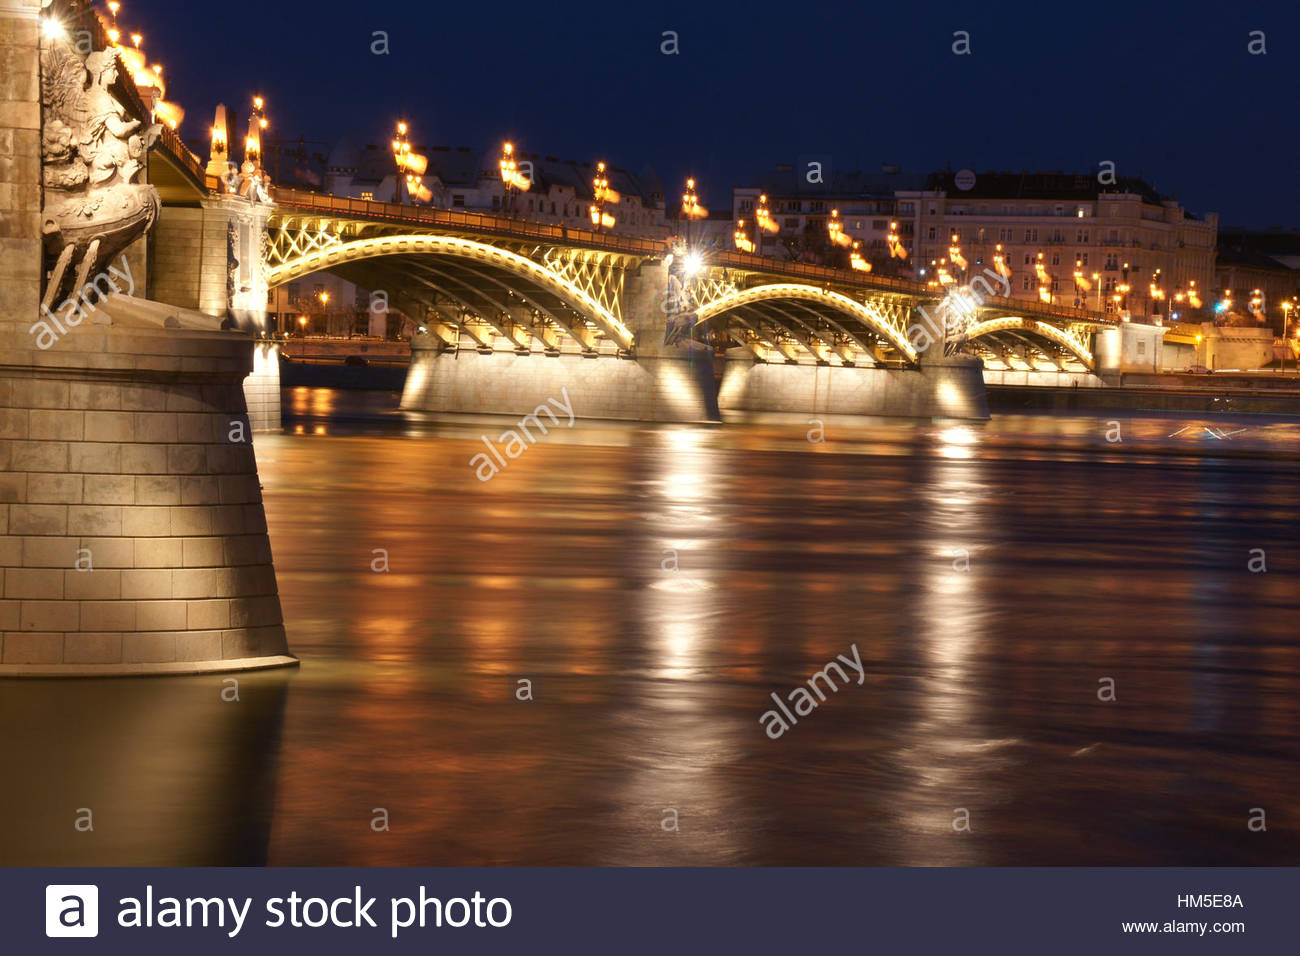 A shot of margit bridge in Budapest, Hungary by night as the Danube flows underneath. Stock Photo